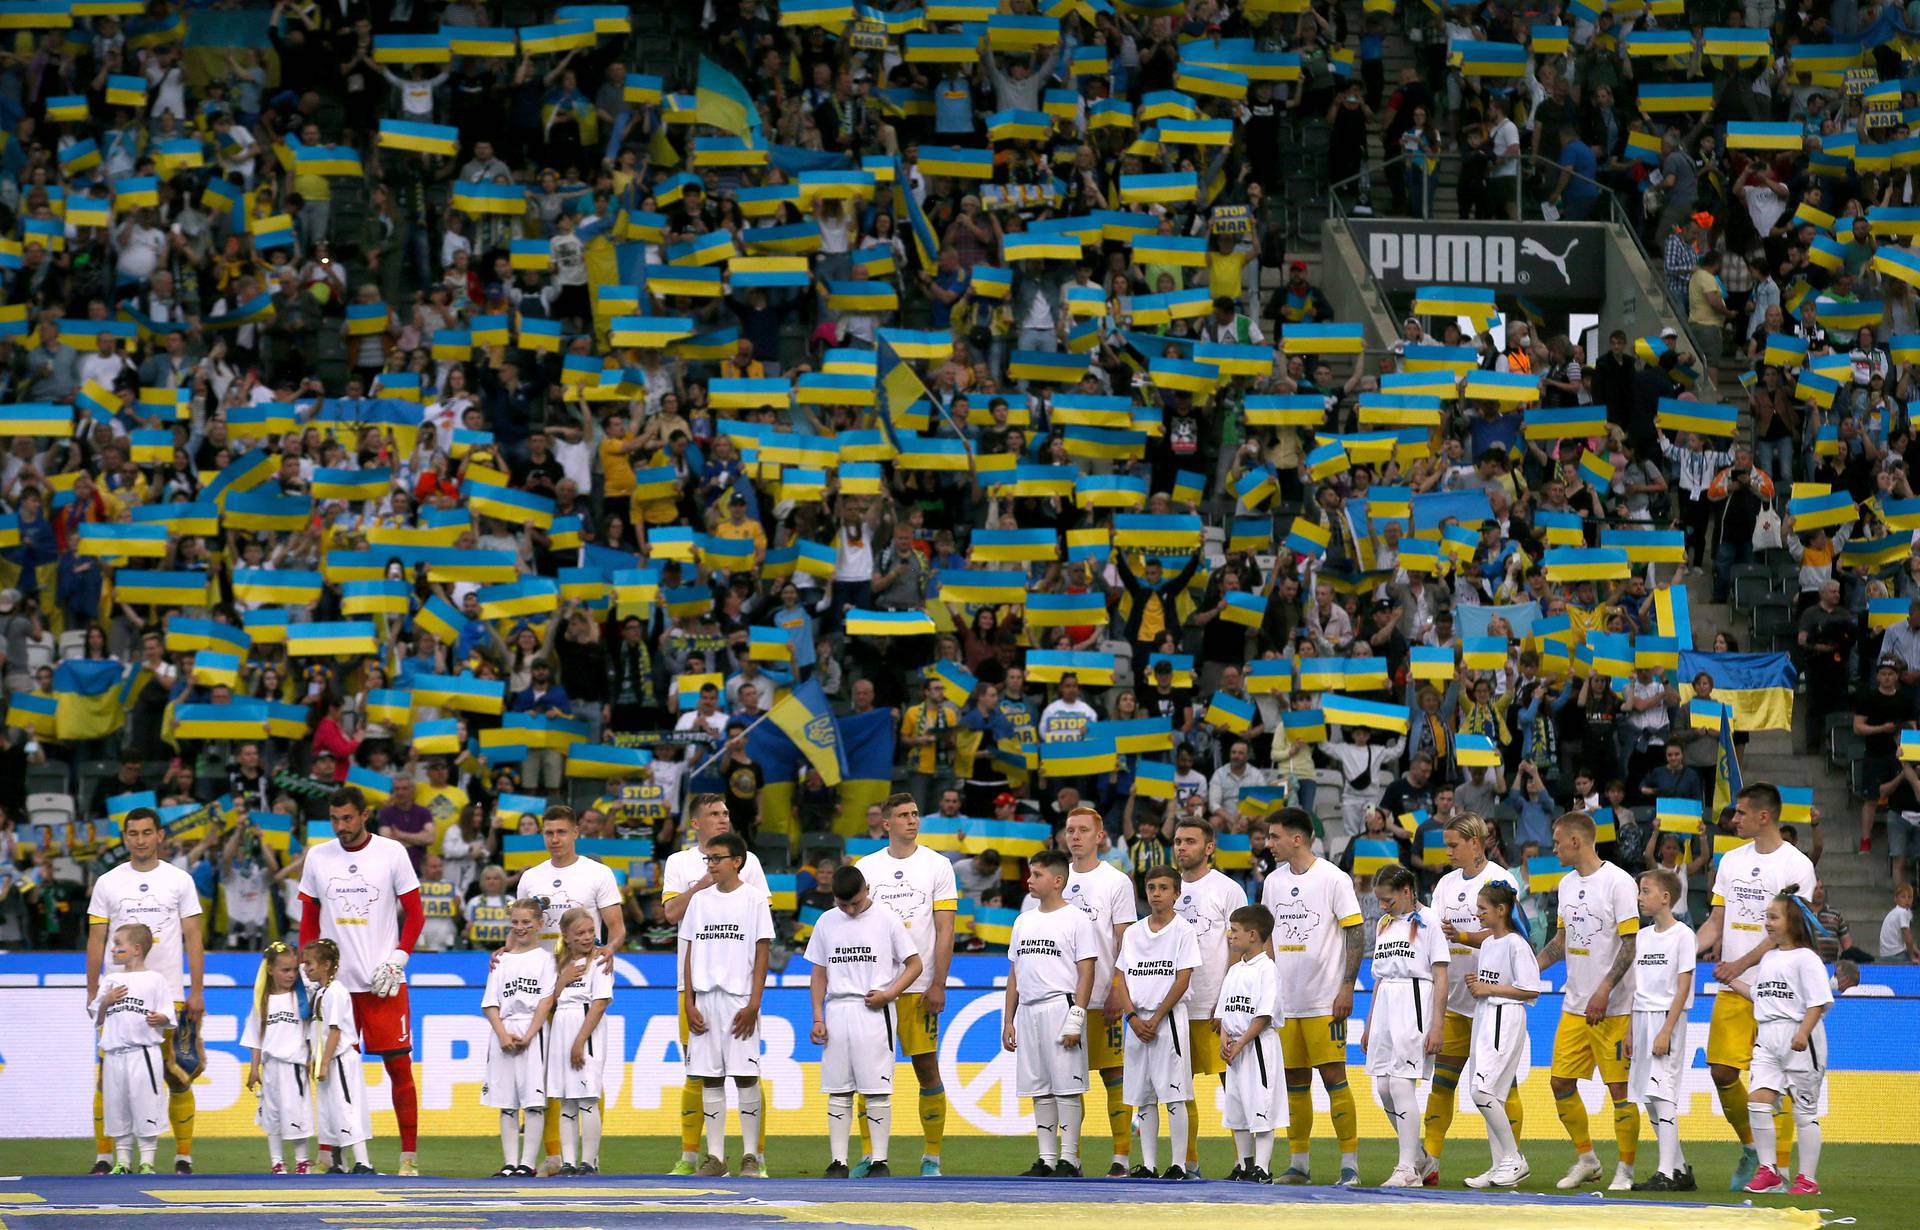 Friendly - A match for peace and the end of war in Ukraine - Borussia Moenchengladbach v Ukraine